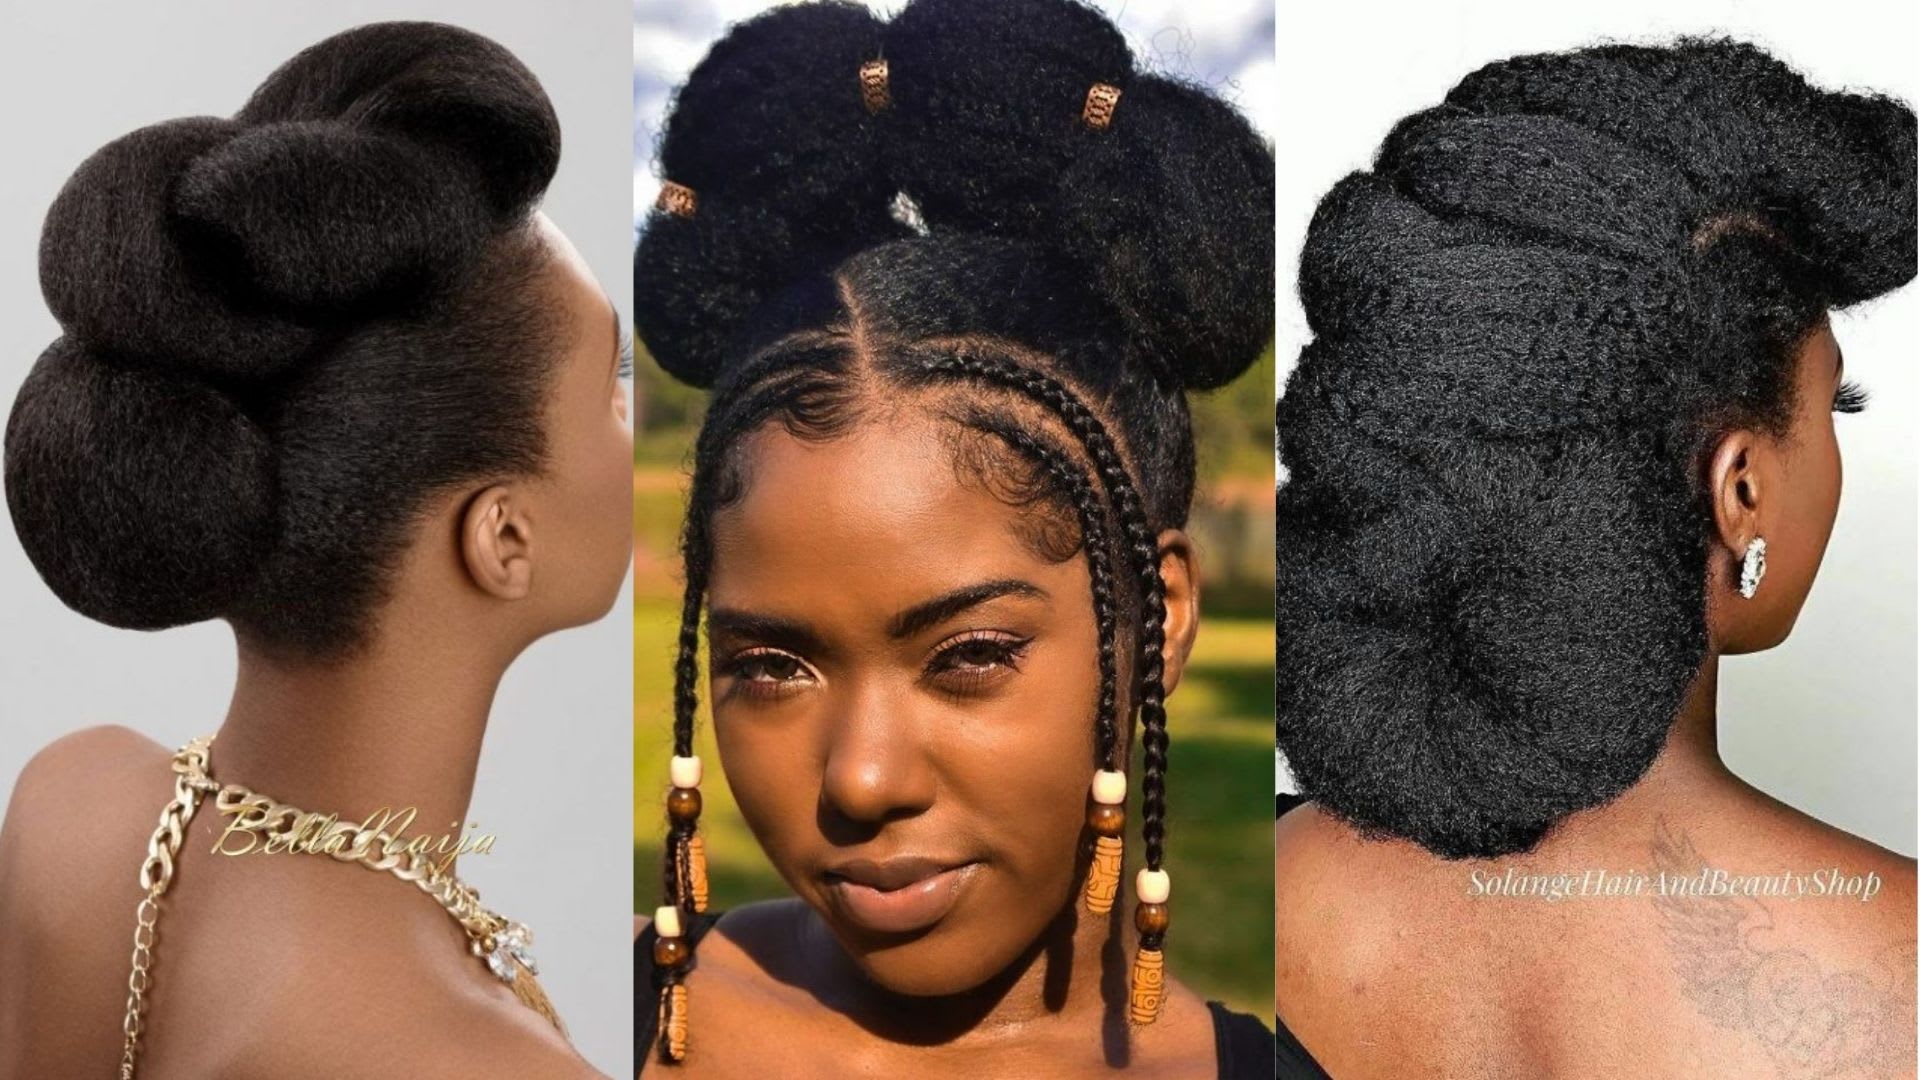 Fashionable and Stylish: 12 Hairstyles for Big Foreheads to Try